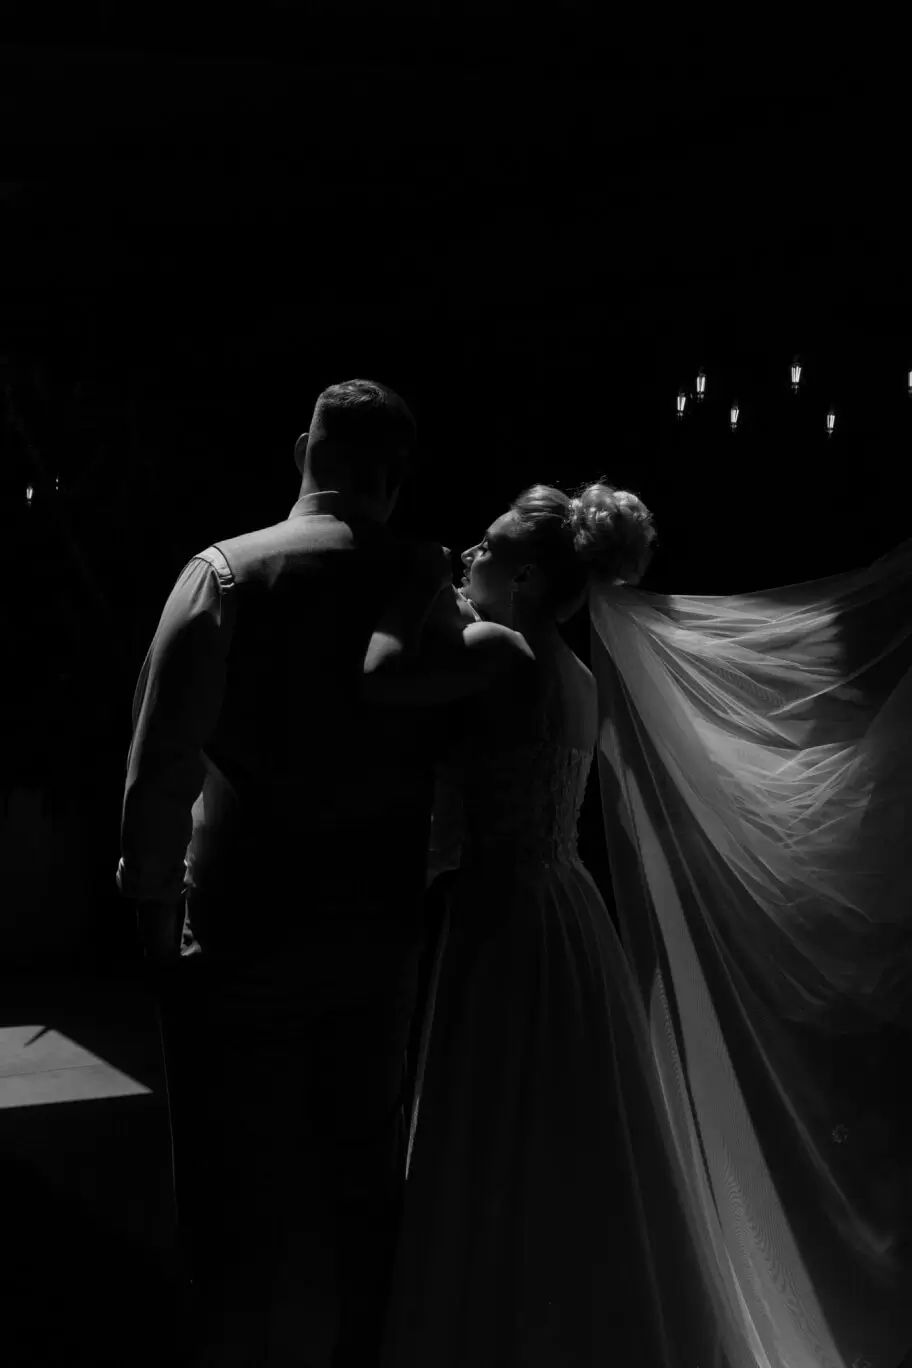 A couple dancing in the dark, backlit with only their silhouettes visible.